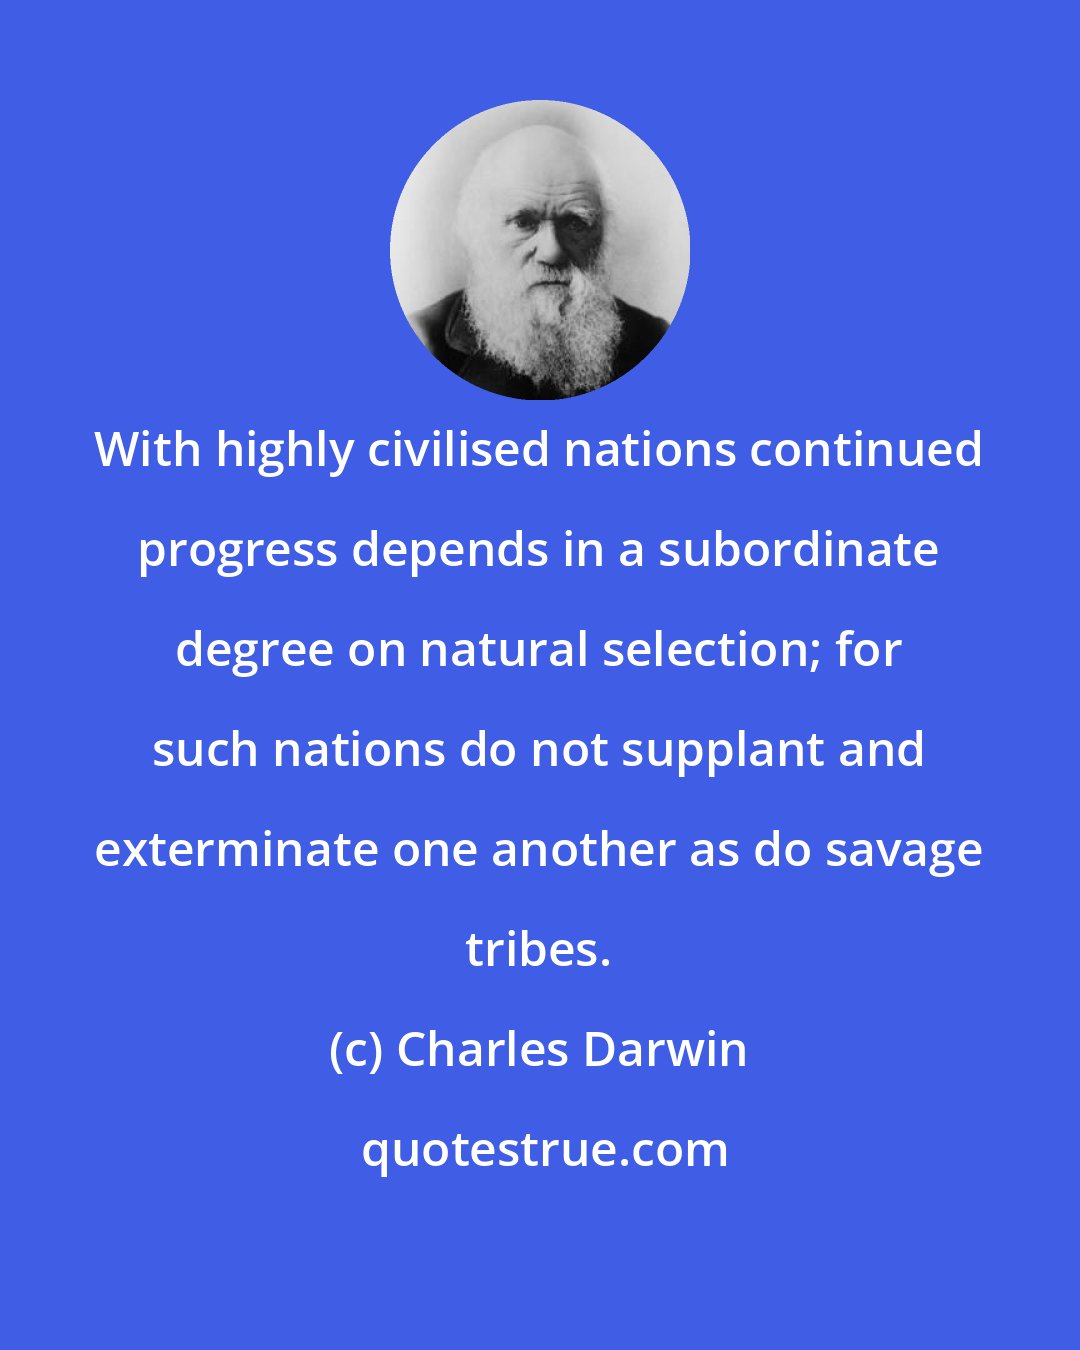 Charles Darwin: With highly civilised nations continued progress depends in a subordinate degree on natural selection; for such nations do not supplant and exterminate one another as do savage tribes.